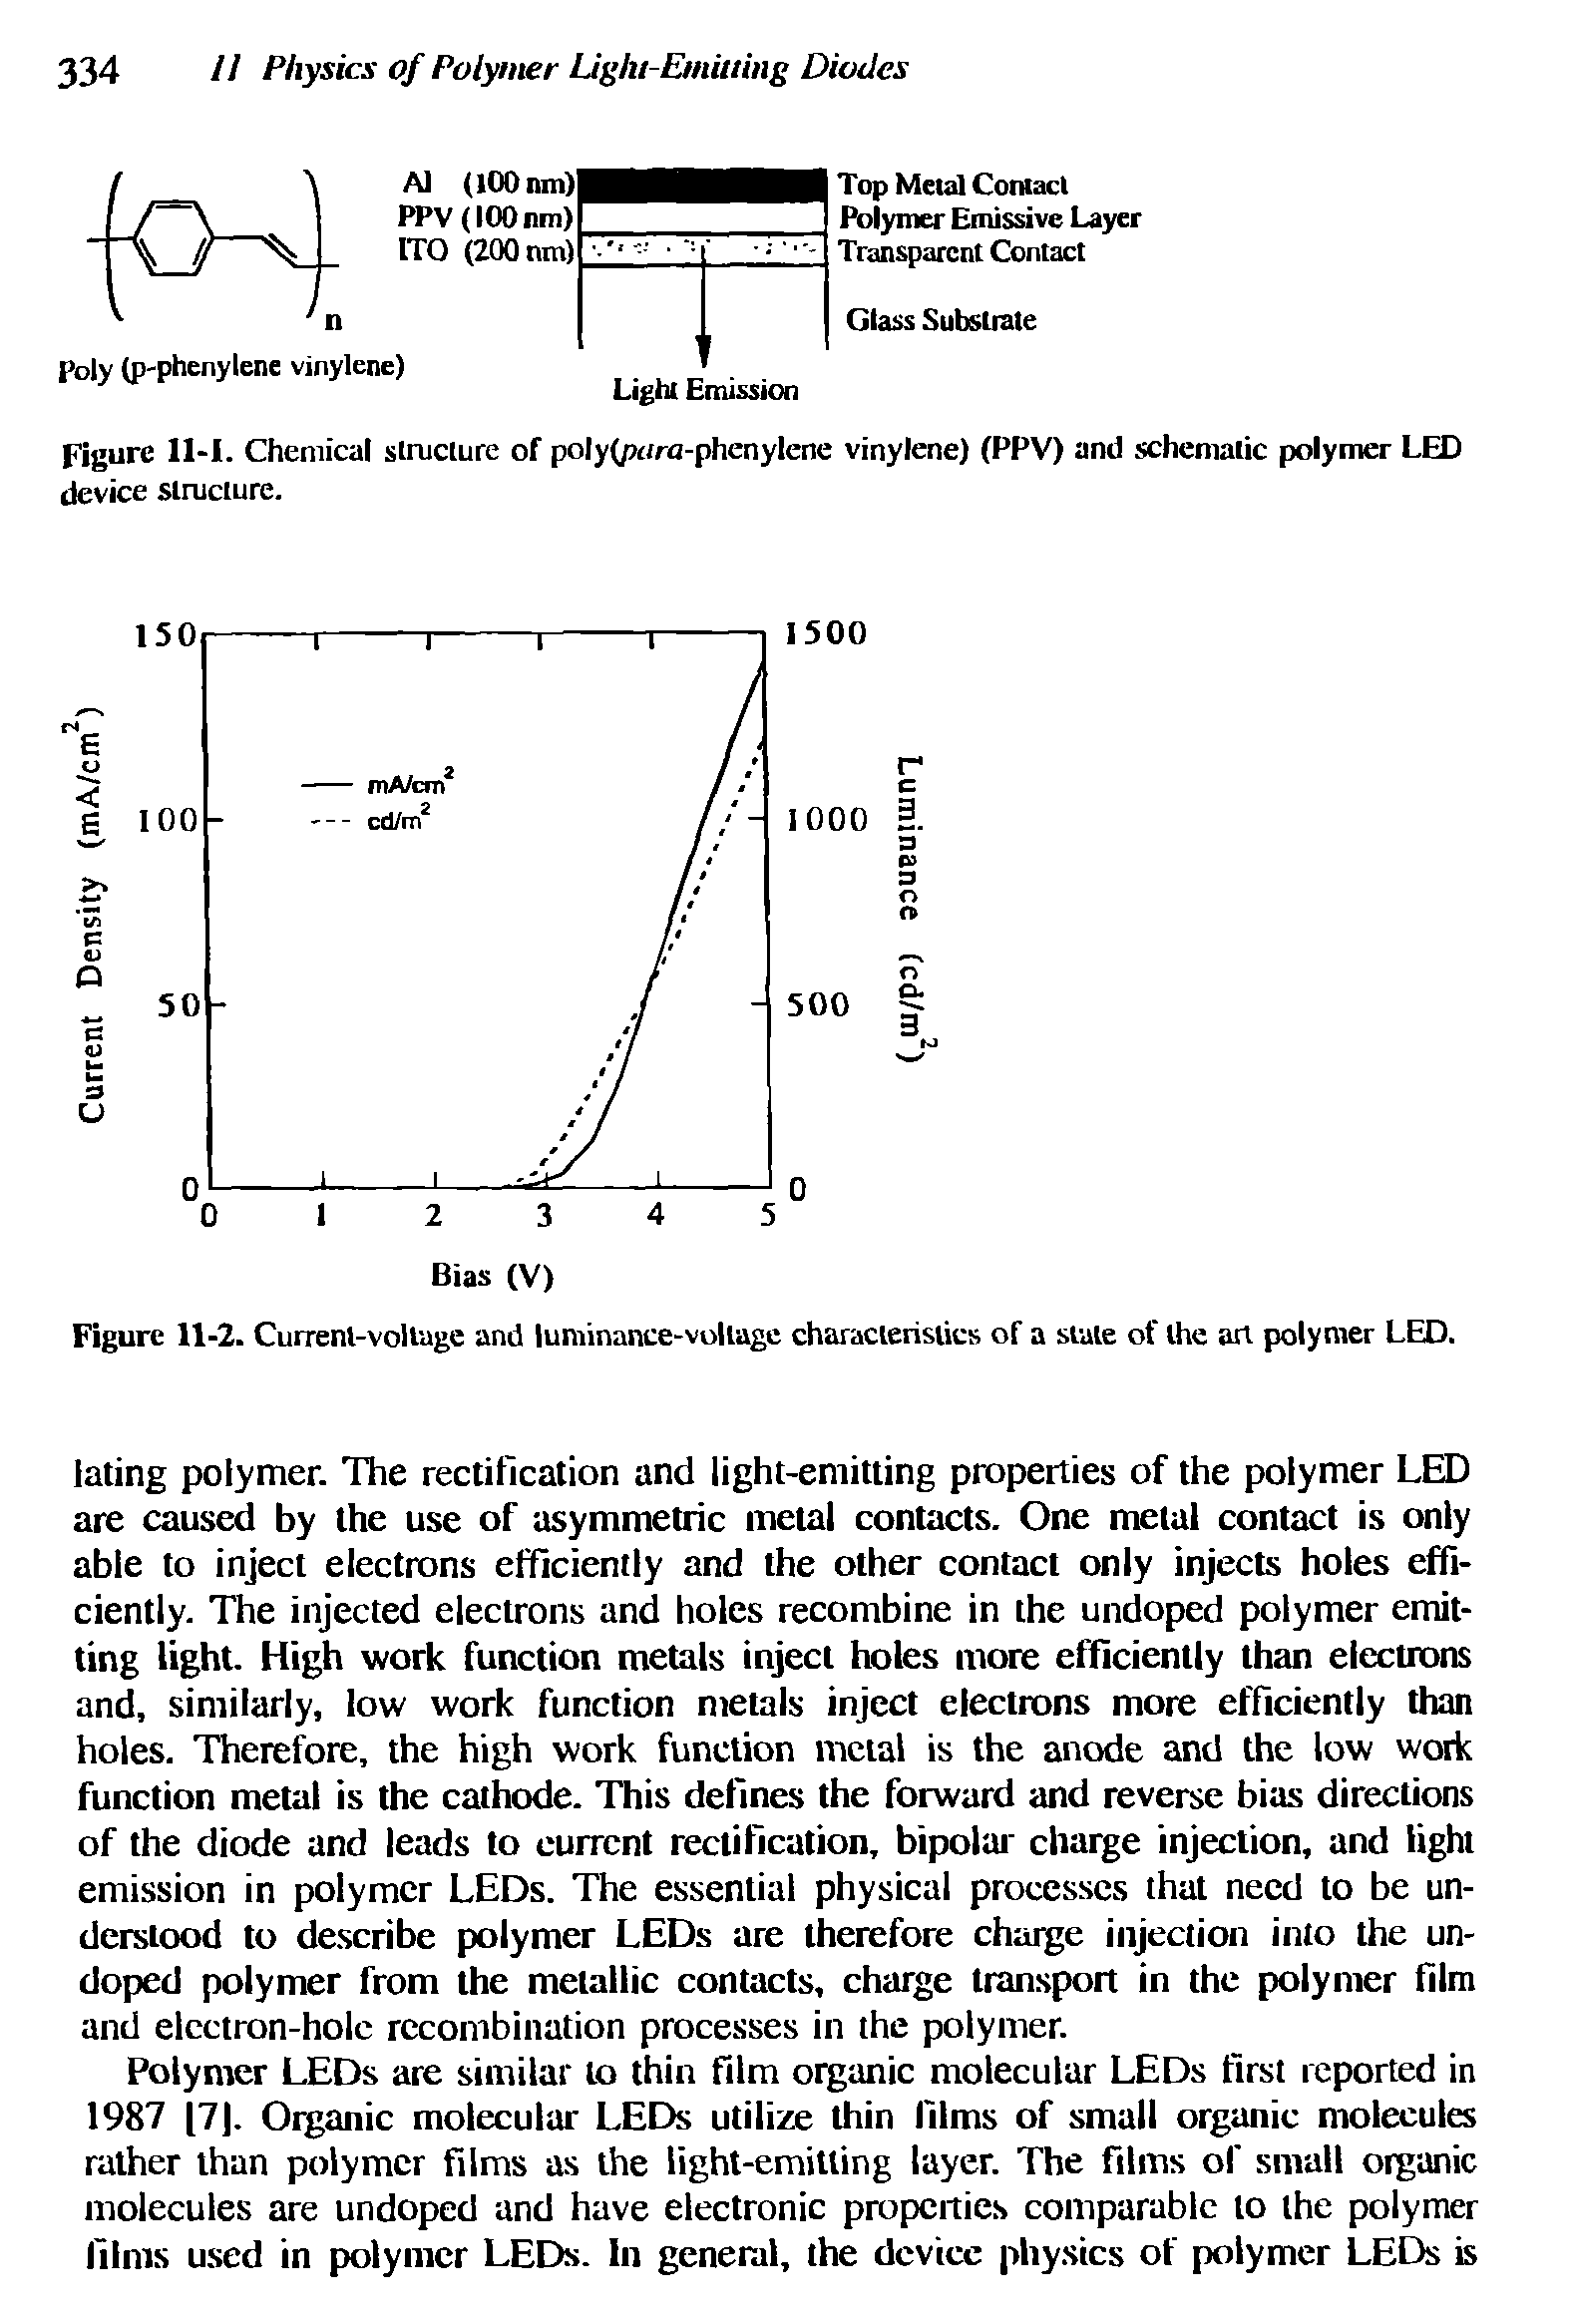 Figure 11-2. Current-voltage and luminance-voltage characteristics of a stale of the art polymer LED.